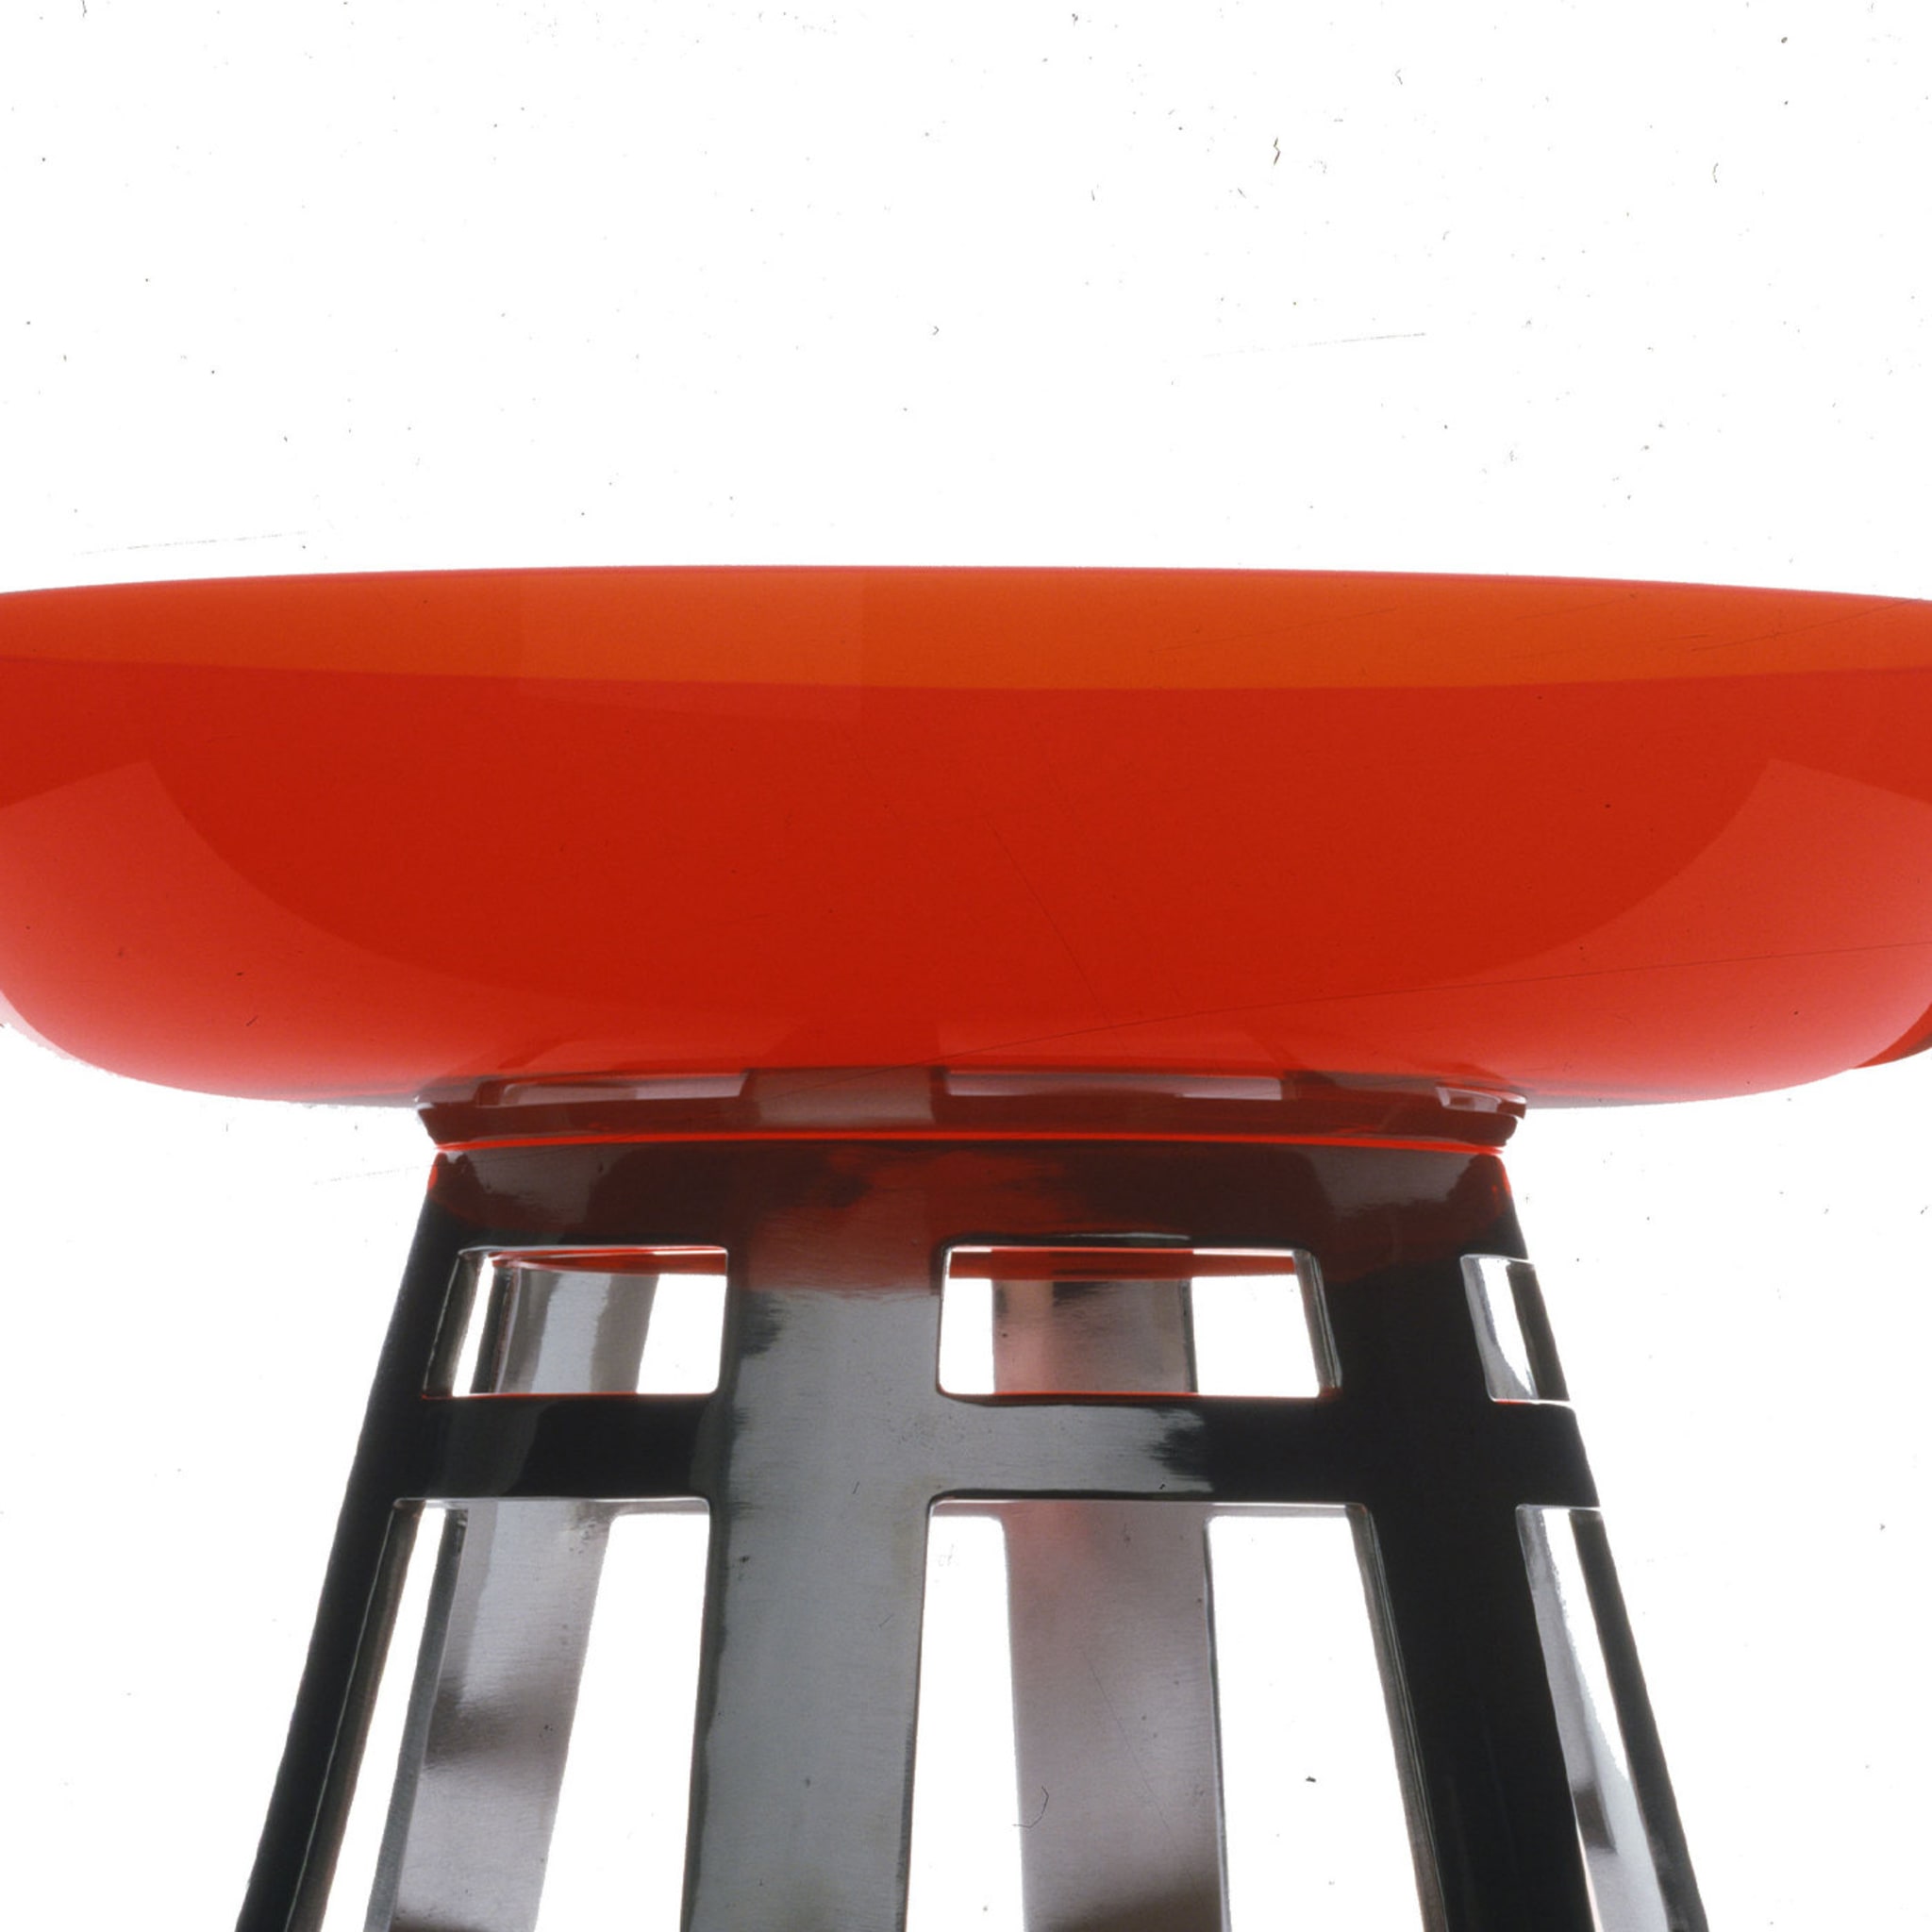 Round Table Limited Edition Red Centerpiece by Ettore Sottsass - Alternative view 1